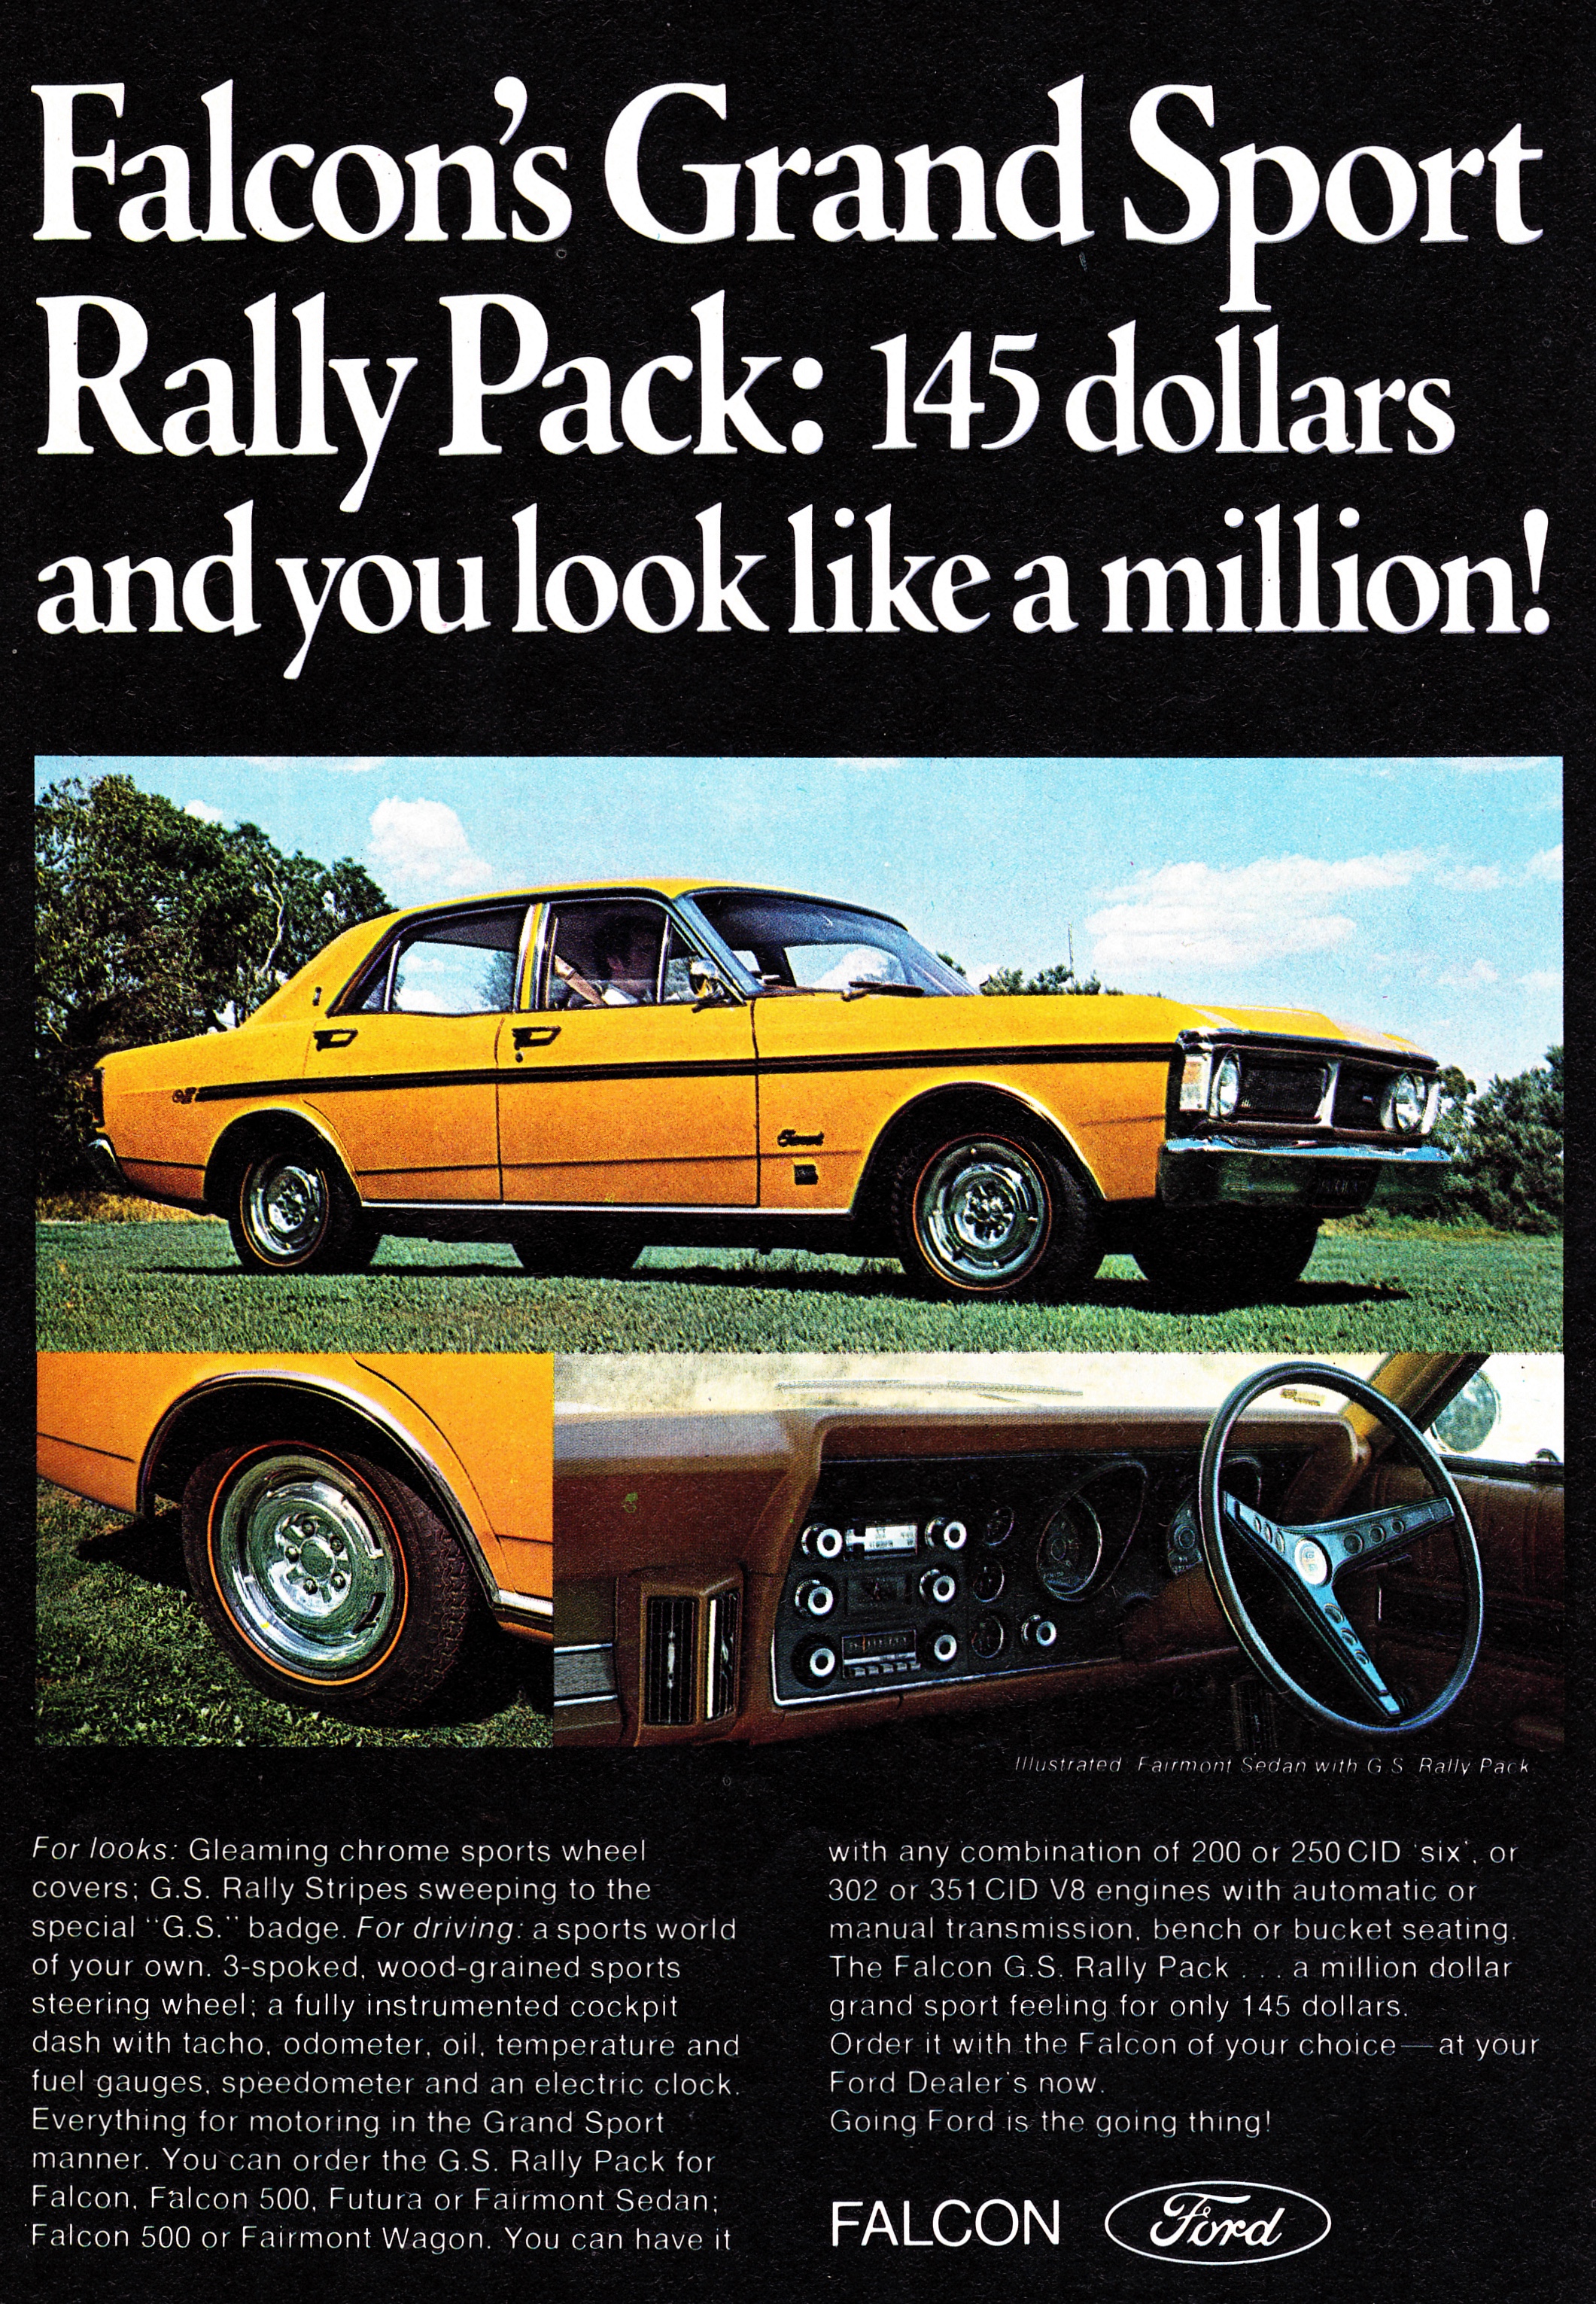 1971 Ford XY Falcon GS Grand Sport Rally Pack